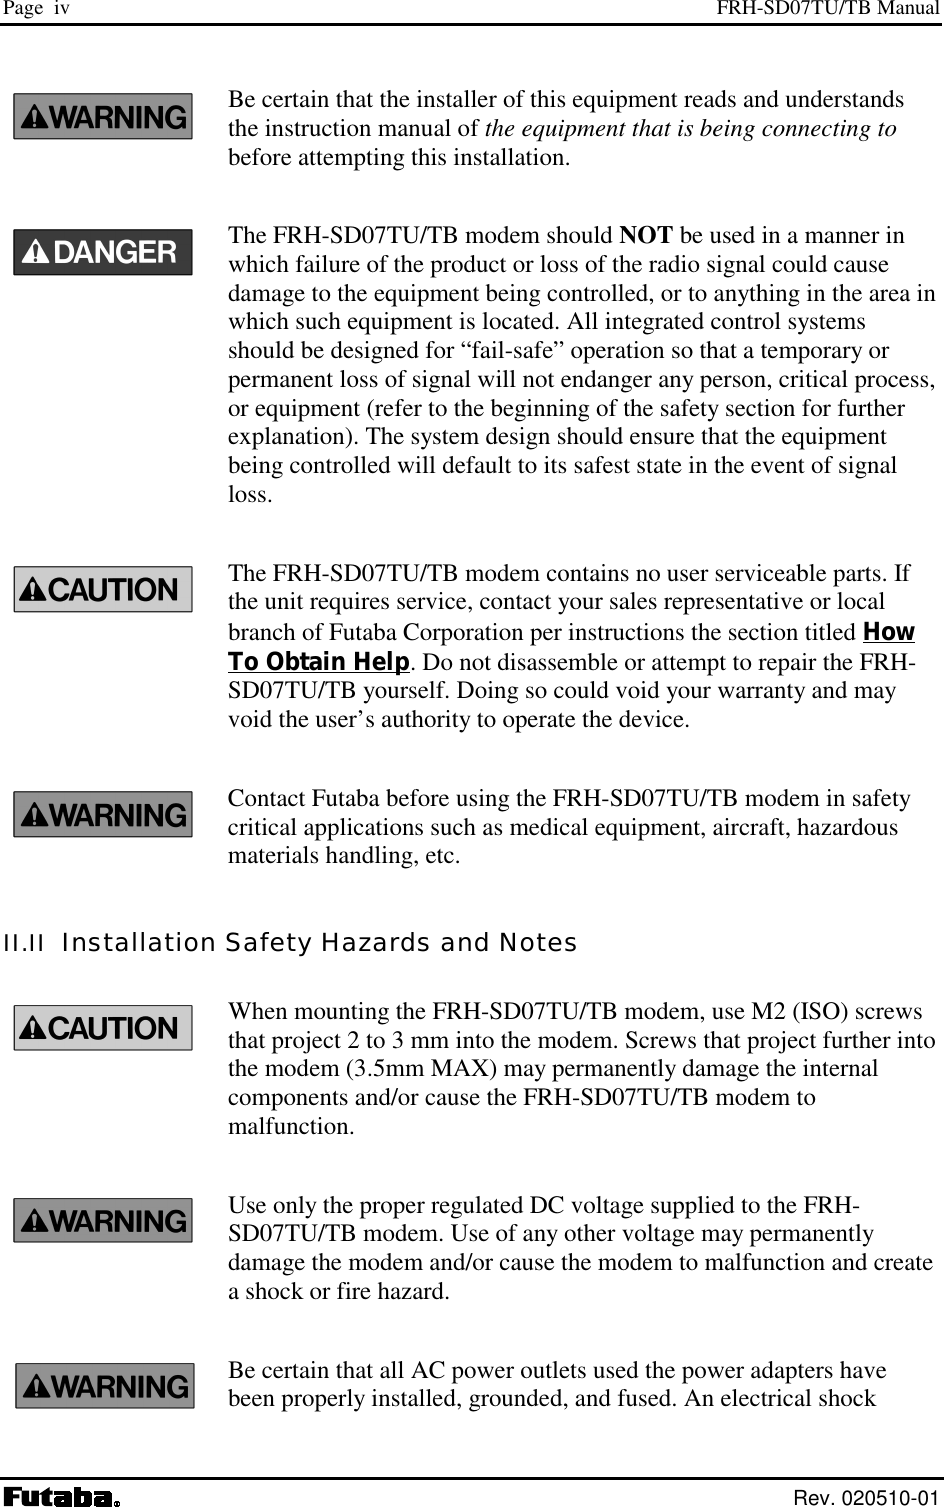 Page  iv  FRH-SD07TU/TB Manual  Rev. 020510-01 Be certain that the installer of this equipment reads and understands the instruction manual of the equipment that is being connecting to before attempting this installation. The FRH-SD07TU/TB modem should NOT be used in a manner in which failure of the product or loss of the radio signal could cause damage to the equipment being controlled, or to anything in the area in which such equipment is located. All integrated control systems should be designed for “fail-safe” operation so that a temporary or permanent loss of signal will not endanger any person, critical process, or equipment (refer to the beginning of the safety section for further explanation). The system design should ensure that the equipment being controlled will default to its safest state in the event of signal loss. The FRH-SD07TU/TB modem contains no user serviceable parts. If the unit requires service, contact your sales representative or local branch of Futaba Corporation per instructions the section titled How To Obtain Help. Do not disassemble or attempt to repair the FRH-SD07TU/TB yourself. Doing so could void your warranty and may void the user’s authority to operate the device. Contact Futaba before using the FRH-SD07TU/TB modem in safety critical applications such as medical equipment, aircraft, hazardous materials handling, etc. II.II  Installation Safety Hazards and Notes When mounting the FRH-SD07TU/TB modem, use M2 (ISO) screws that project 2 to 3 mm into the modem. Screws that project further into the modem (3.5mm MAX) may permanently damage the internal components and/or cause the FRH-SD07TU/TB modem to malfunction. Use only the proper regulated DC voltage supplied to the FRH-SD07TU/TB modem. Use of any other voltage may permanently damage the modem and/or cause the modem to malfunction and create a shock or fire hazard. Be certain that all AC power outlets used the power adapters have been properly installed, grounded, and fused. An electrical shock 